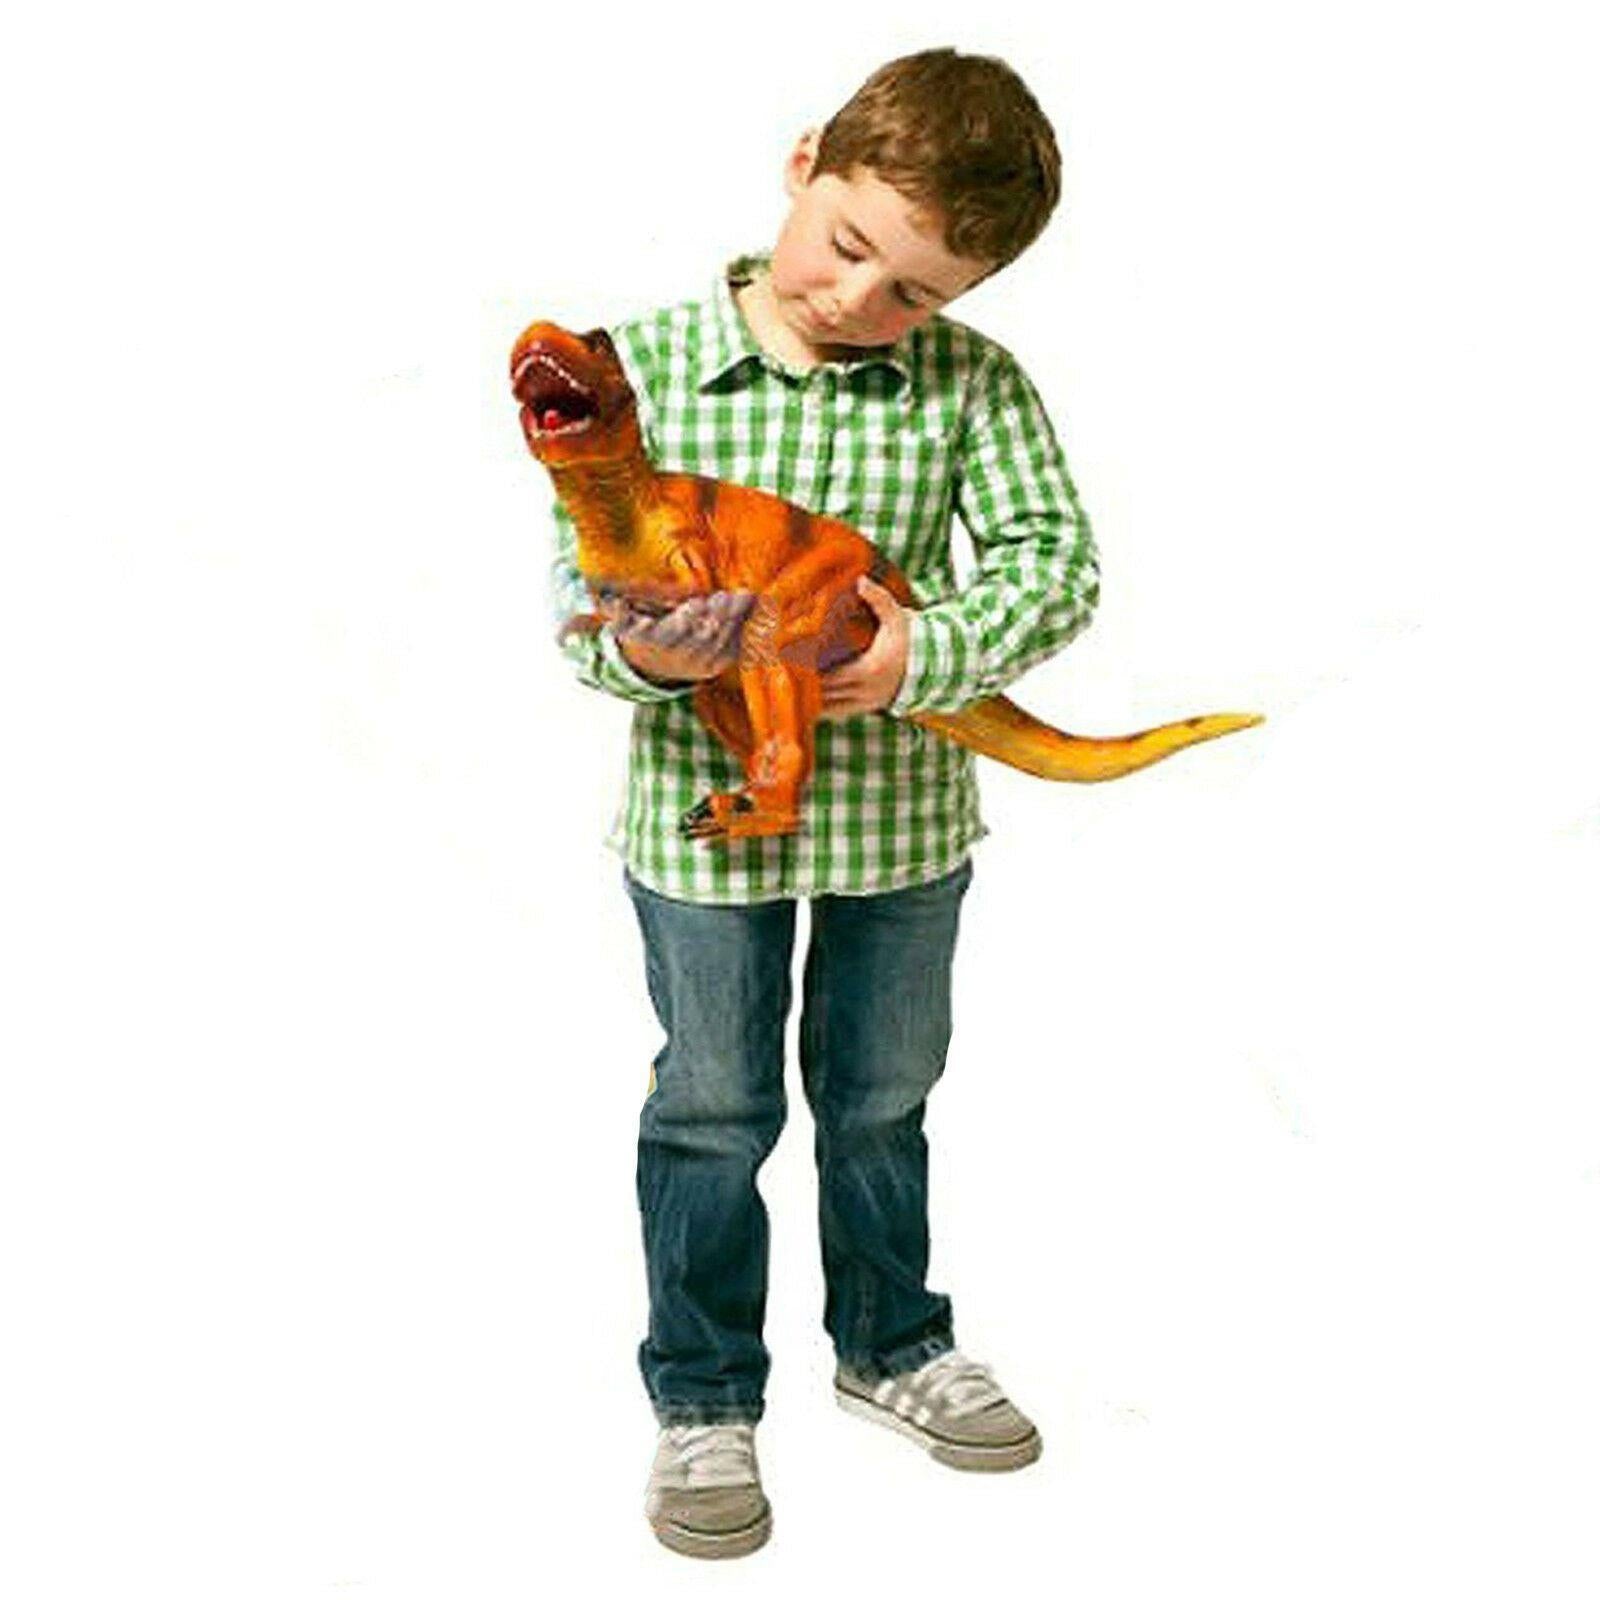 Large Dinosaurs Figures Set of 4 by The Magic Toy Shop - The Magic Toy Shop